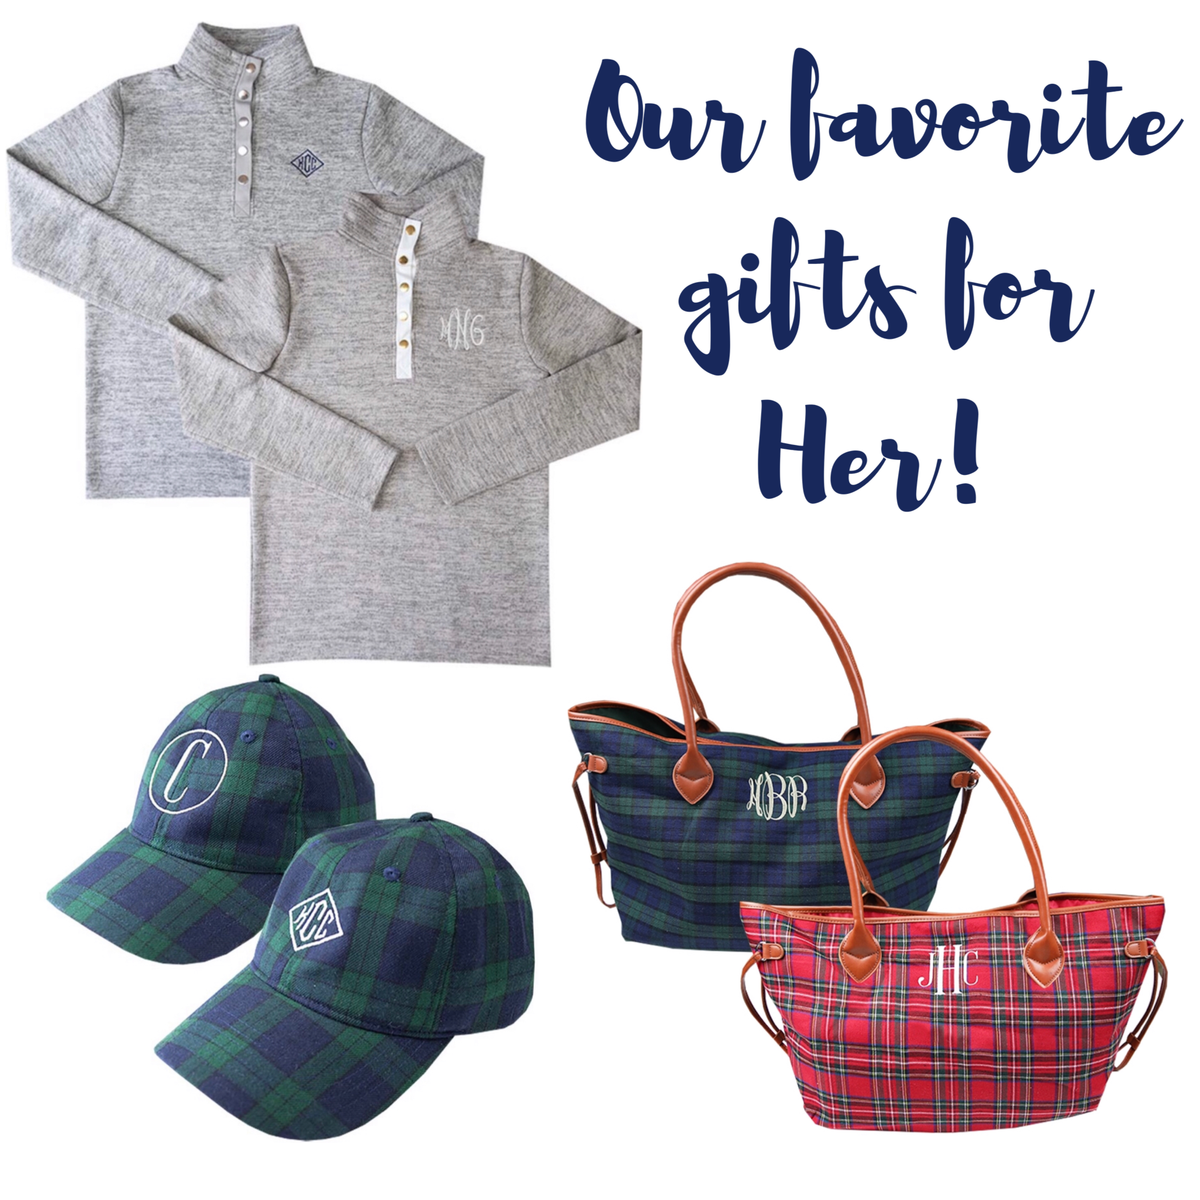 Great Gifts for Her!!